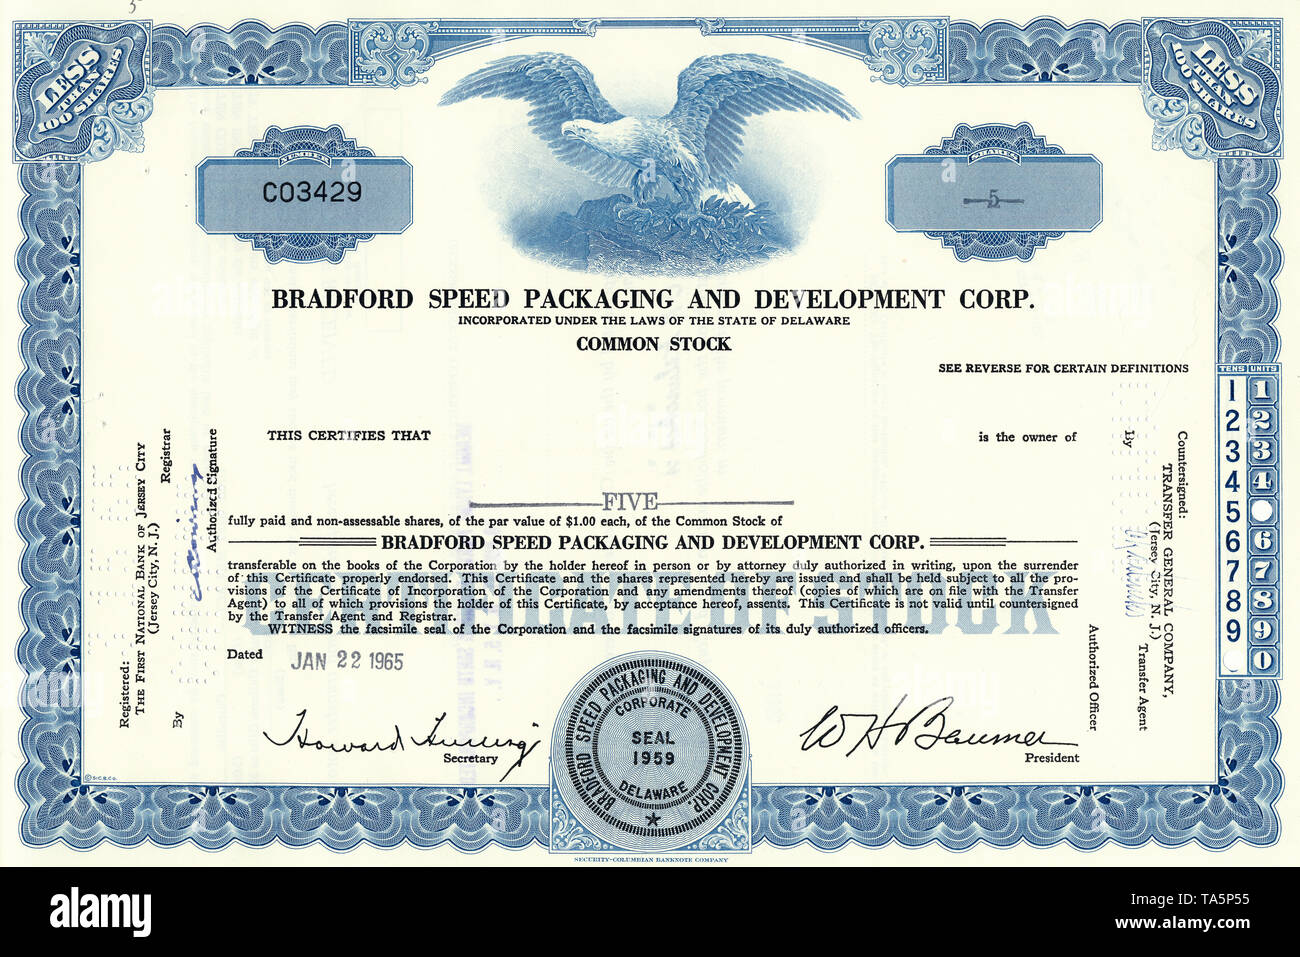 Historical stock certificate of Bradford Speed Packaging and Development Corporation, a manufacturer of packaging machines for food packaging technology, today Kliklok-Woodman, Delaware, USA, 1965, Wertpapier, historische Aktie, Bradford Speed Packaging and Development Corporation, Hersteller von Verpackungsmaschinen für die Lebensmittel-Verpackungstechnik, heute Kliklok-Woodman, 1965, Delaware, USA Stock Photo